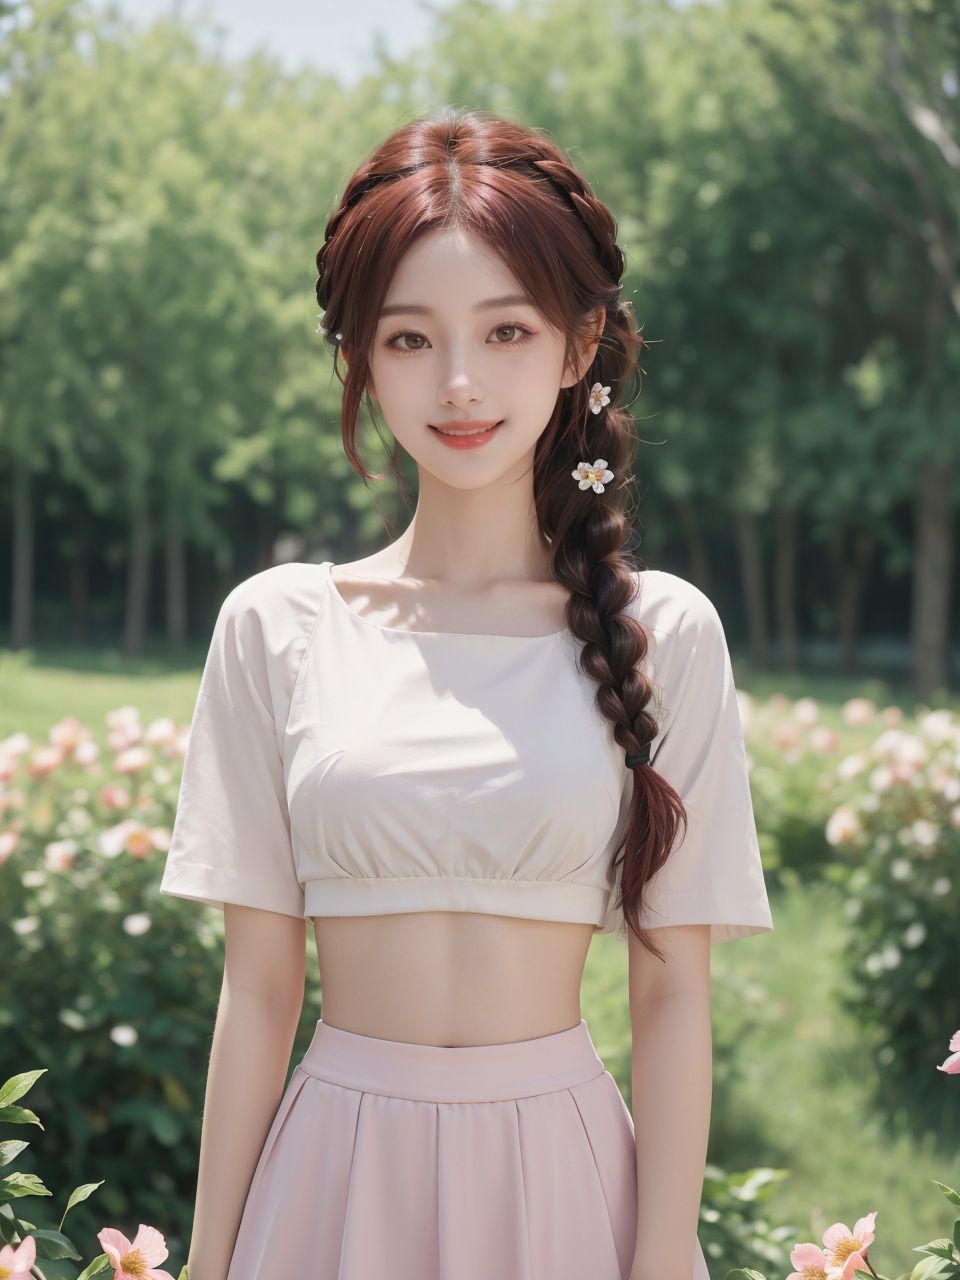 masterpiece,best quality,gorgeous pale american cute girl,smiling,(crop top),red hair loose braided hair,short polca skirt,lean against a tree,field,flowers smiling,perfectly symmetrical face,detailed skin,elegant,alluring,attractive,amazing photograph,masterpiece,best quality,8K,high quality,photorealistic,realism,art photography,Nikon D850,16k,sharp focus,masterpiece,breathtaking,atmospheric perspective,diffusion,pore correlation,skin imperfections,DSLR,80mm Sigma f2,depth of field,intricate natural lighting,looking at camara,